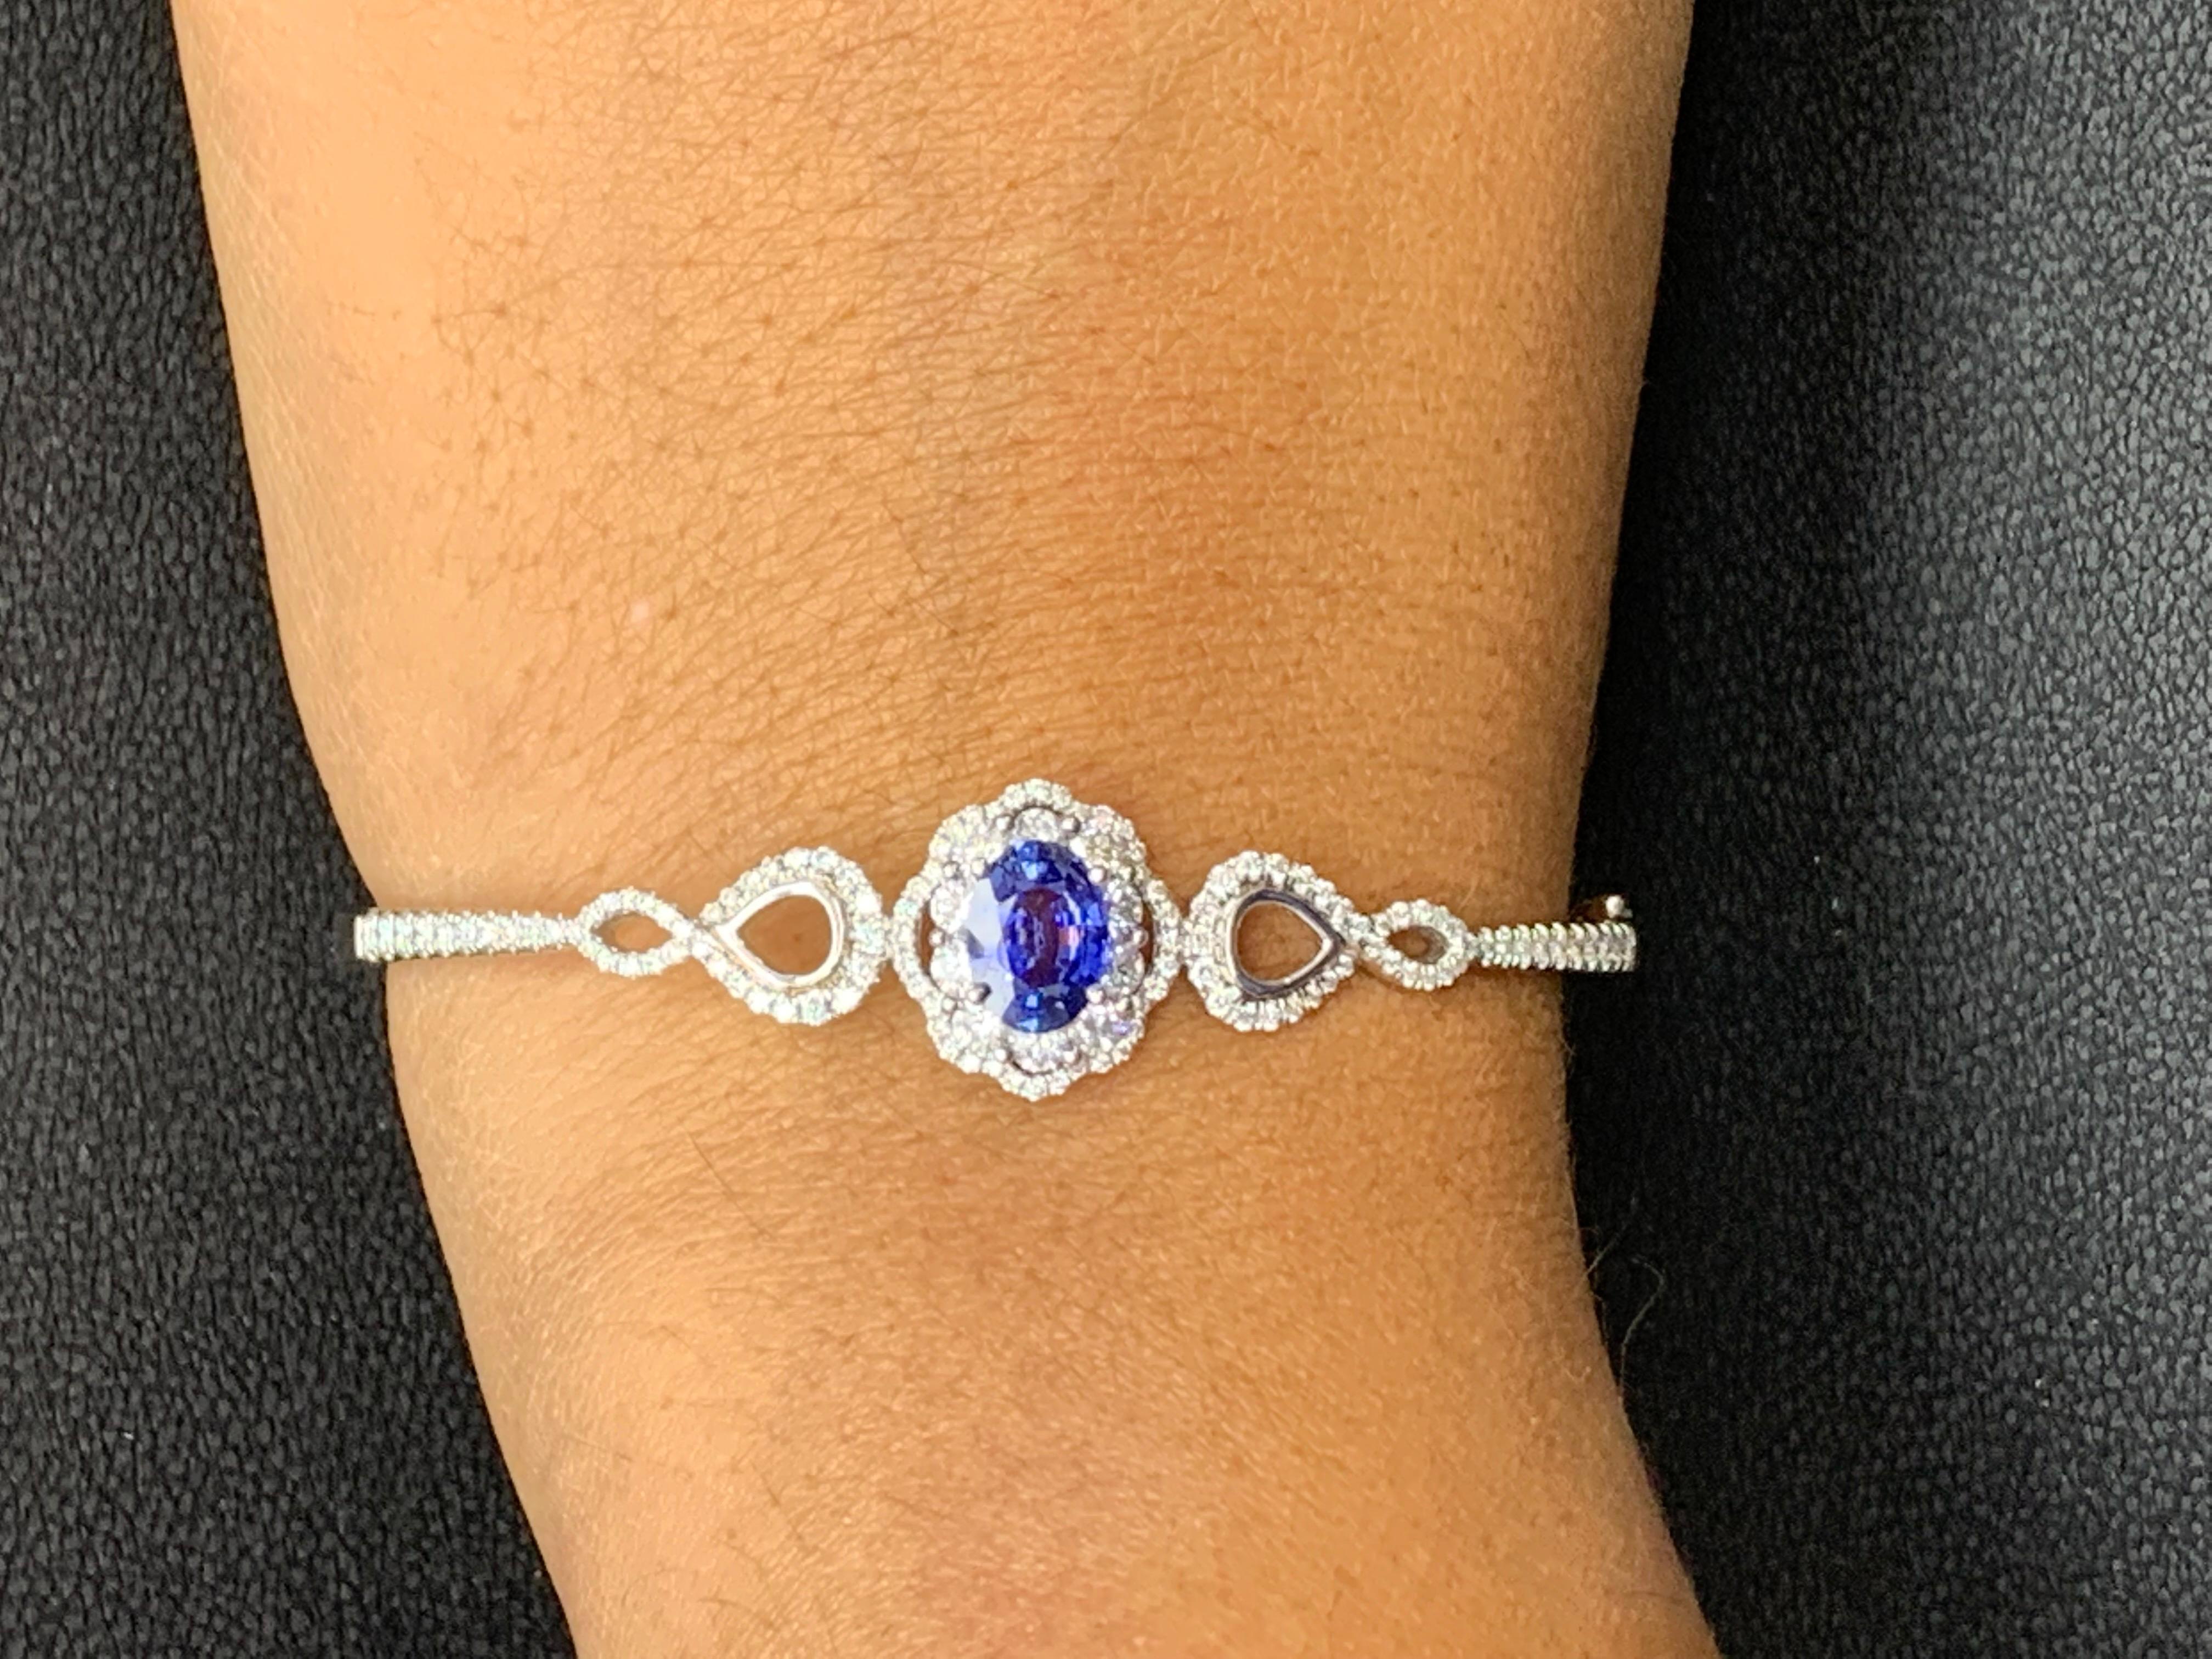 1.71 Carat Oval cut  Sapphire and Diamond Bangle Bracelet in 18K White Gold For Sale 1